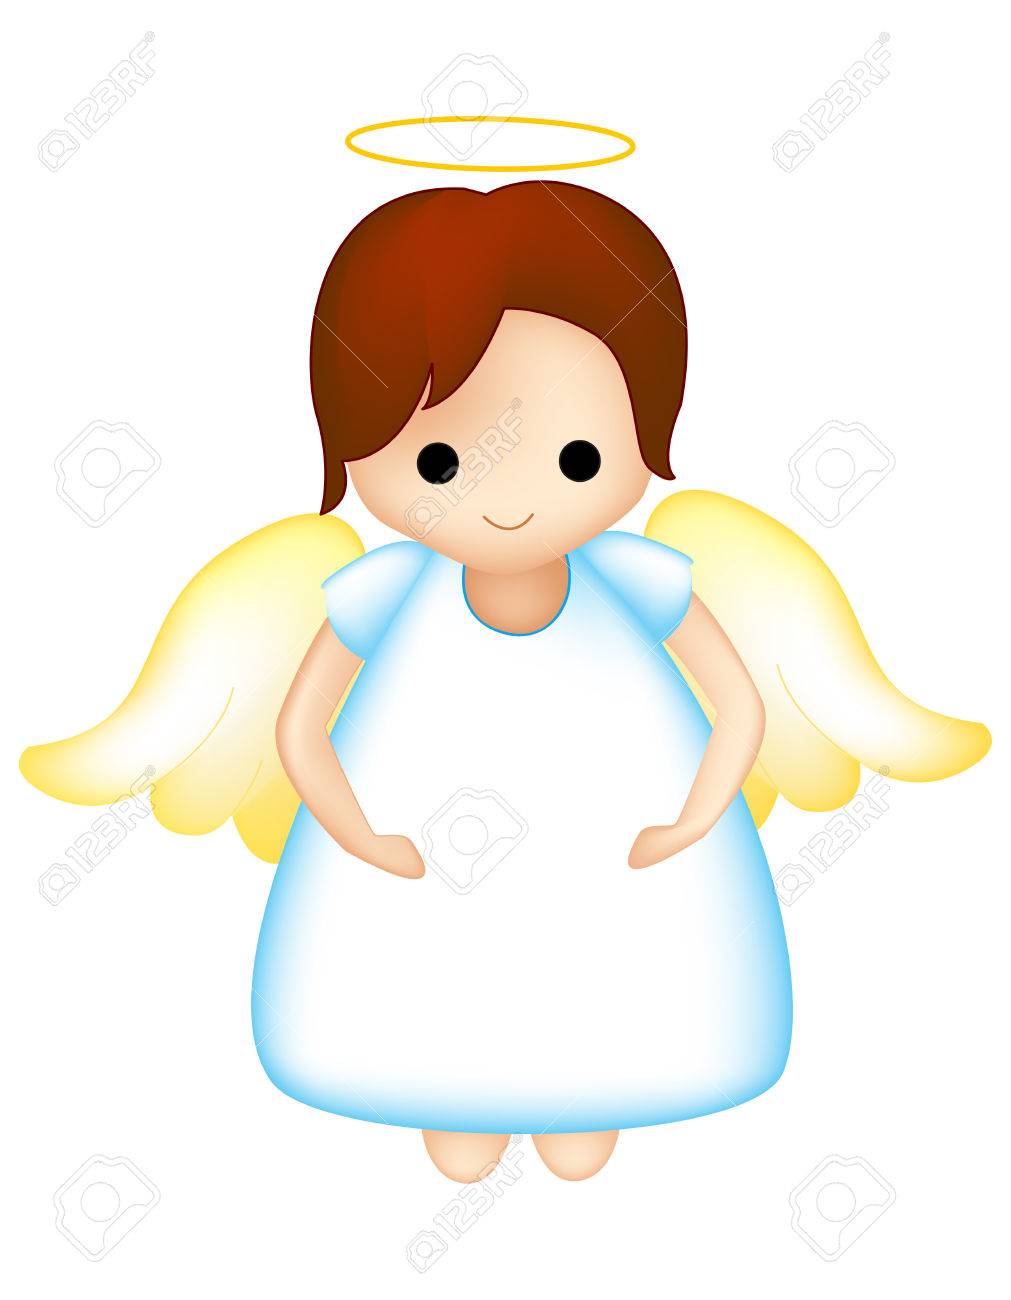 Free Angels Clipart vector, Download Free Clip Art on Owips